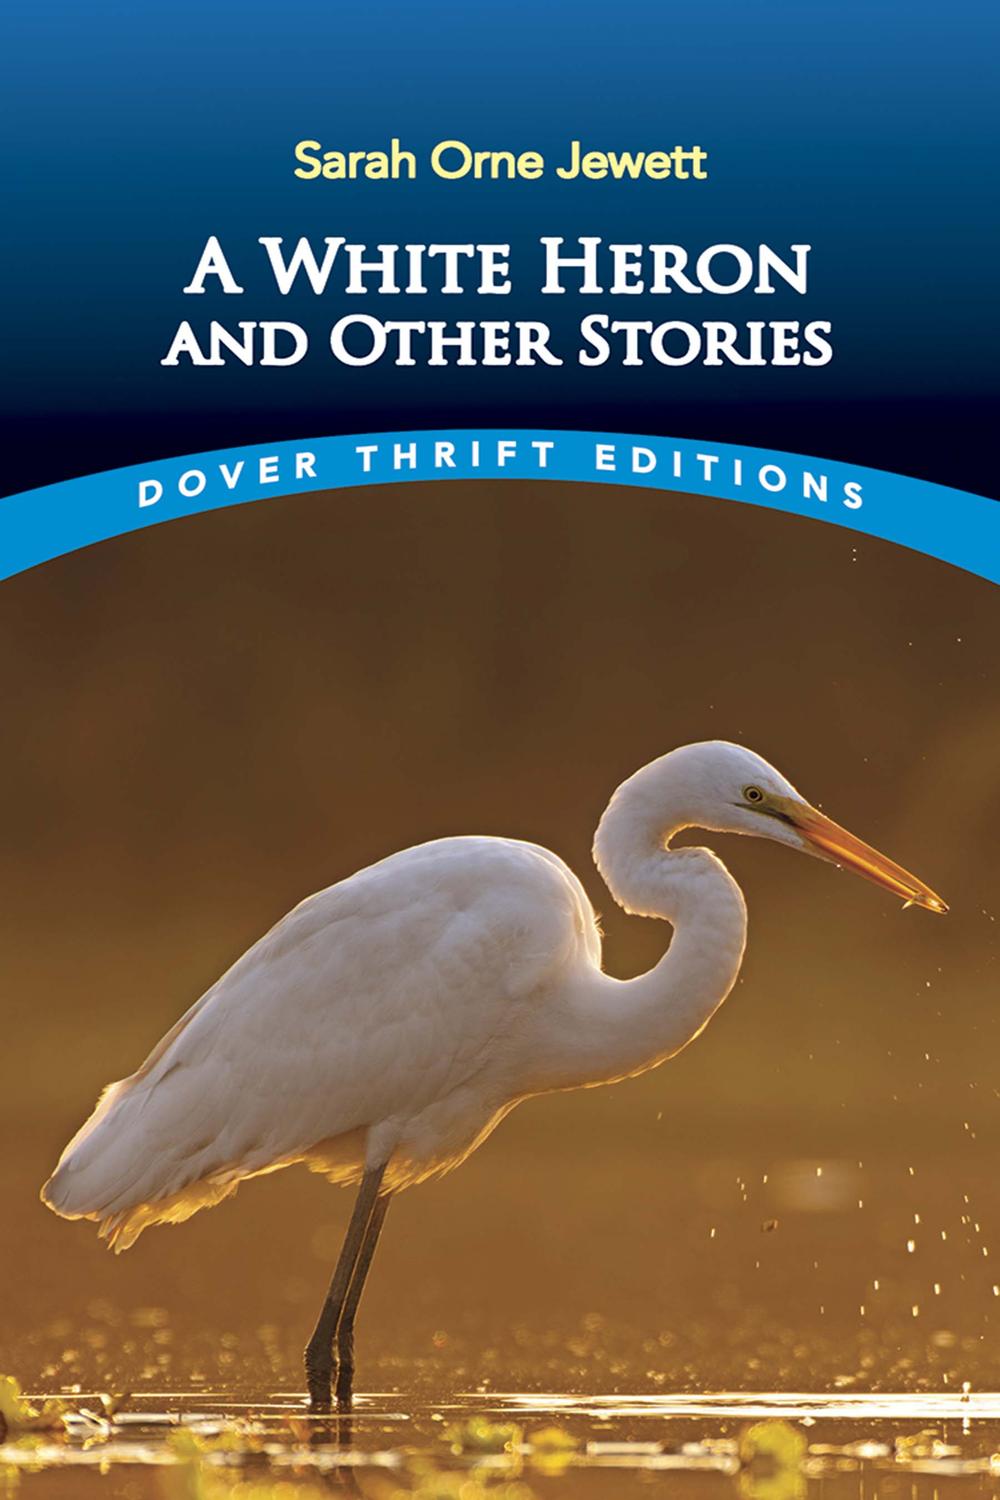 A White Heron and Other Stories - Sarah Orne Jewett,,